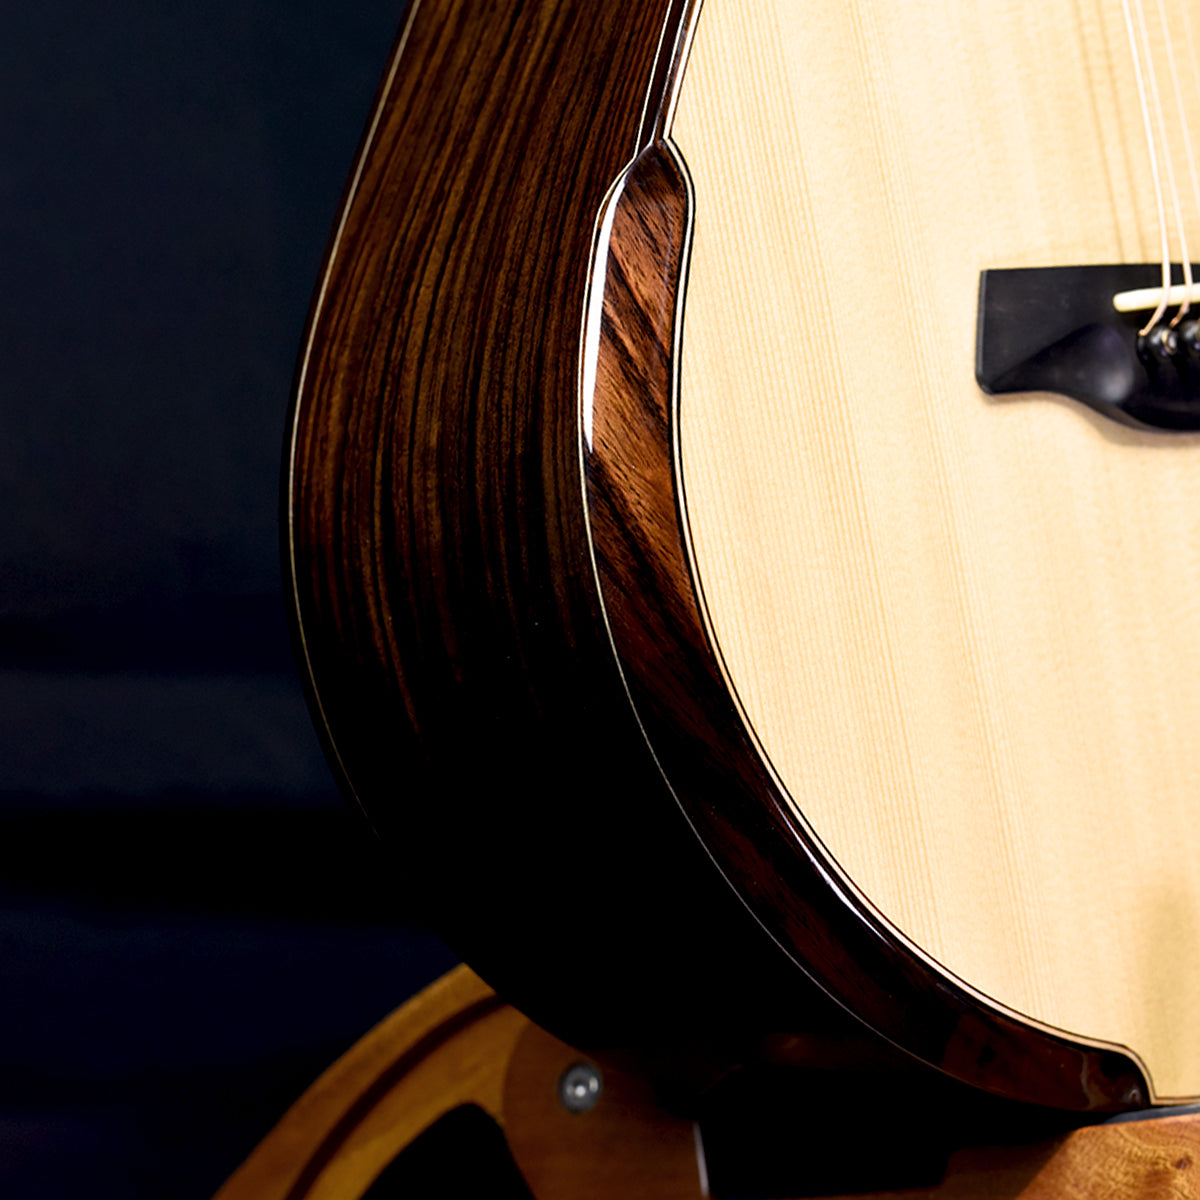 Modern 00 Sitka with Indian Rosewood